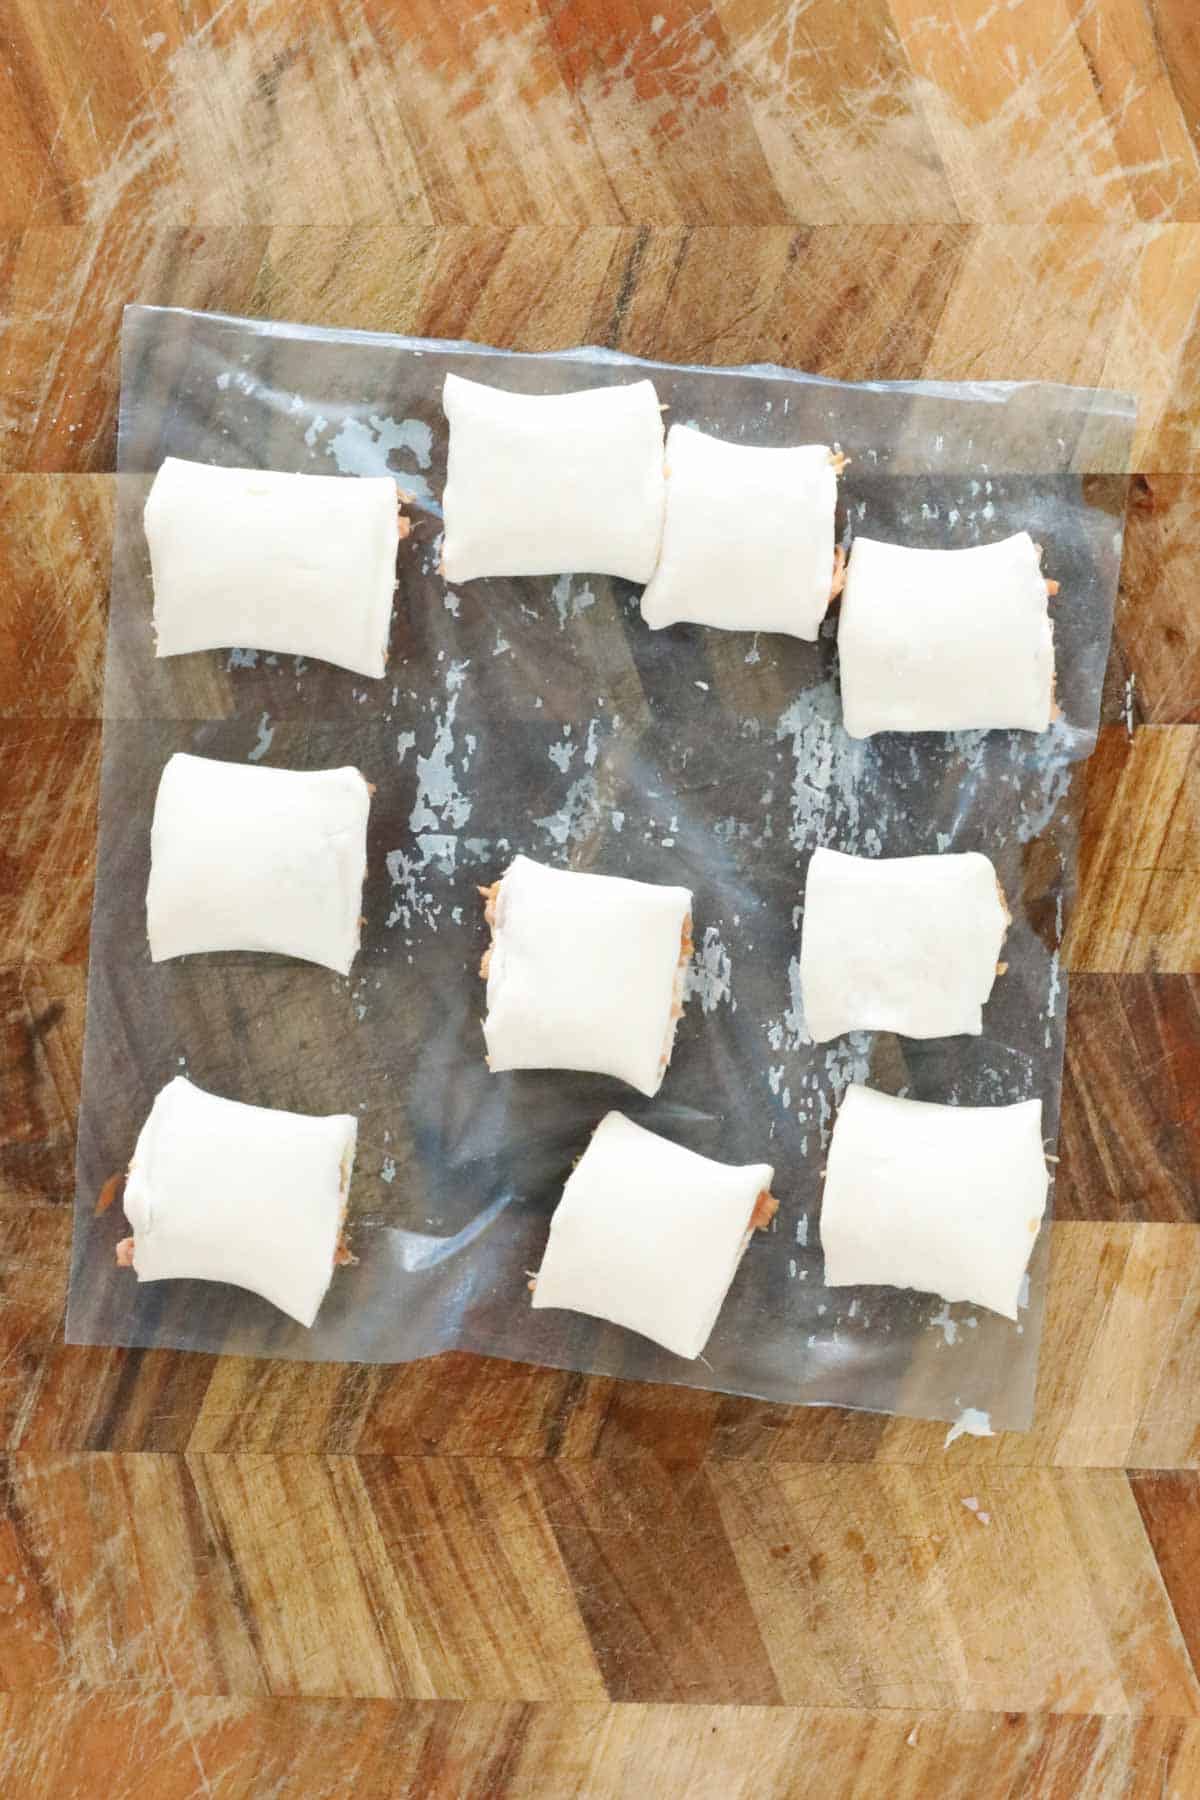 Uncooked sausage rolls cut into bite size pieces.